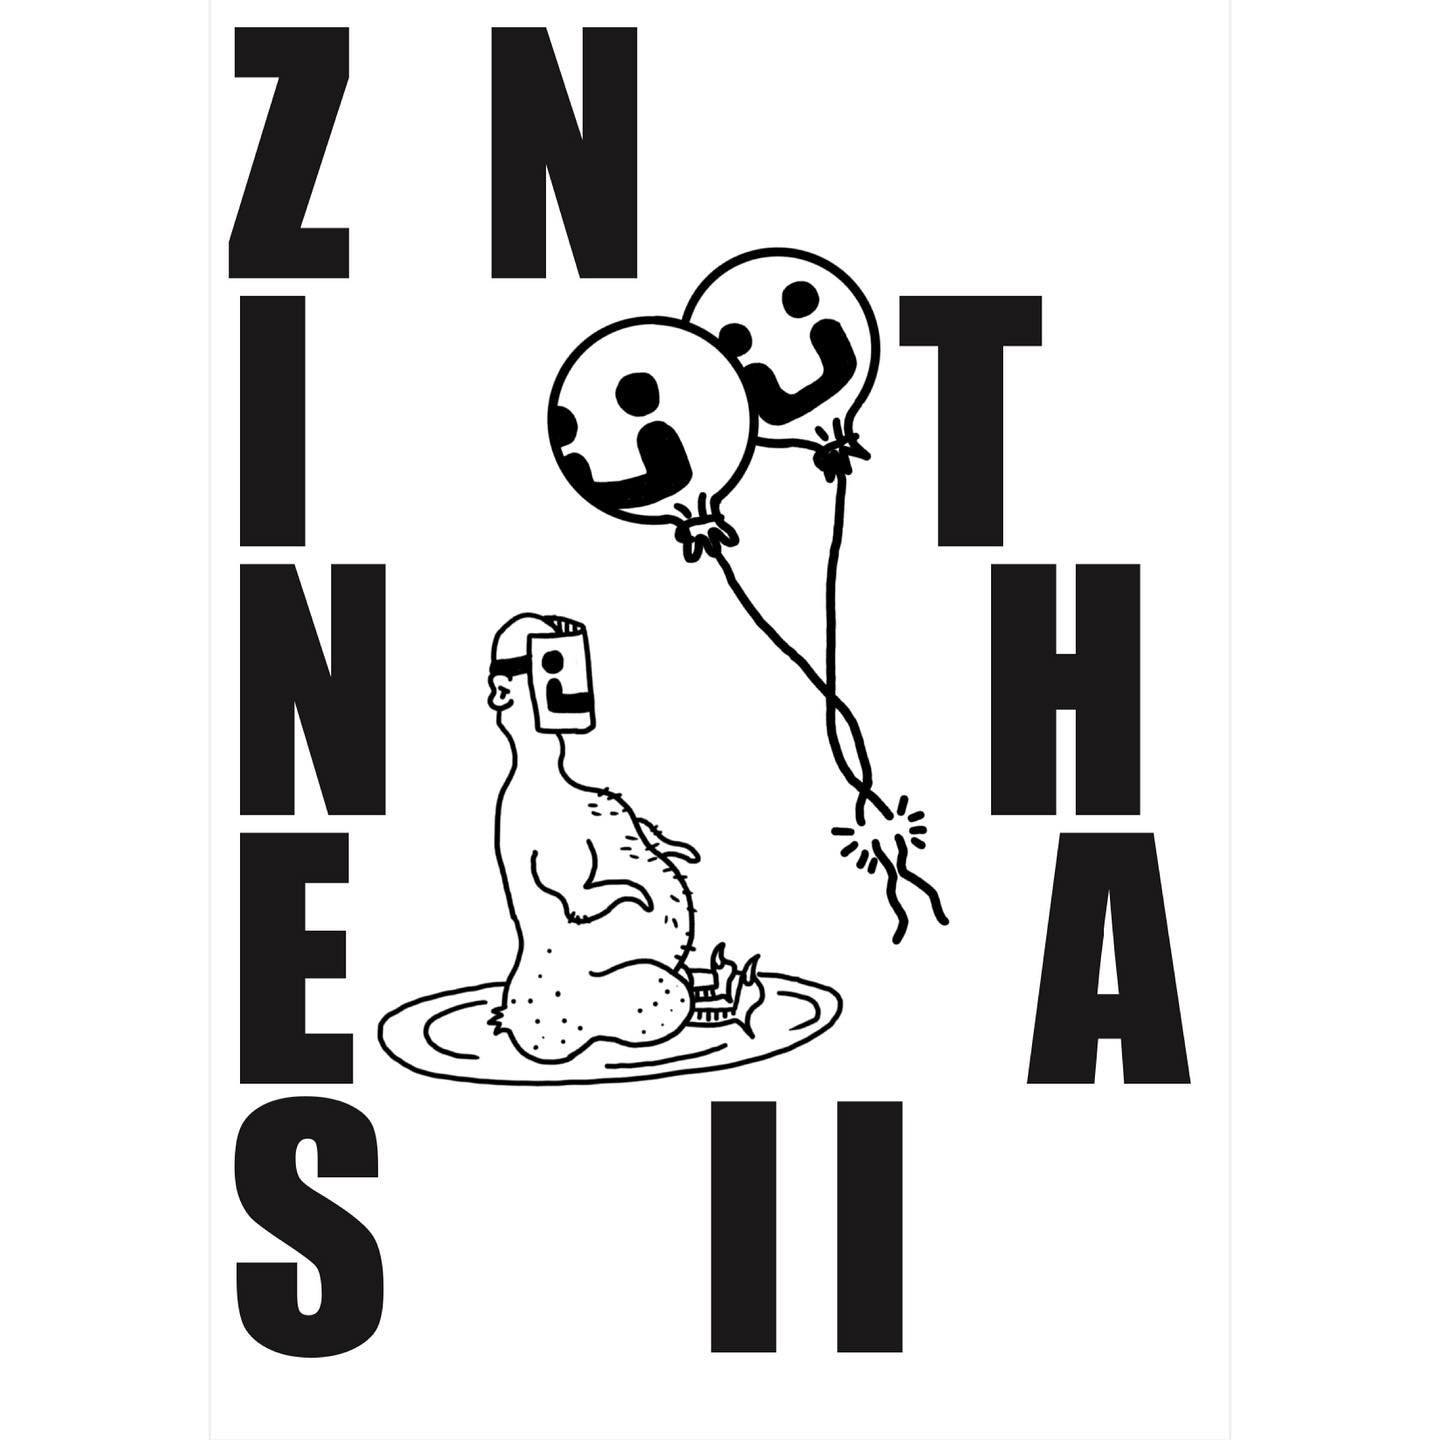 It here folks.. we&rsquo;ll almost, join us TONIGHT 7-11pm for the Zines n Tha launch party @pressbroscoffee on Lark Lane!!!! 

Zines, Prints n coffee party 🎈 🎉

The artists&hellip;
@sldghmmr @mollypilkington @majalorko @miss_ridd @olivia__hardman 